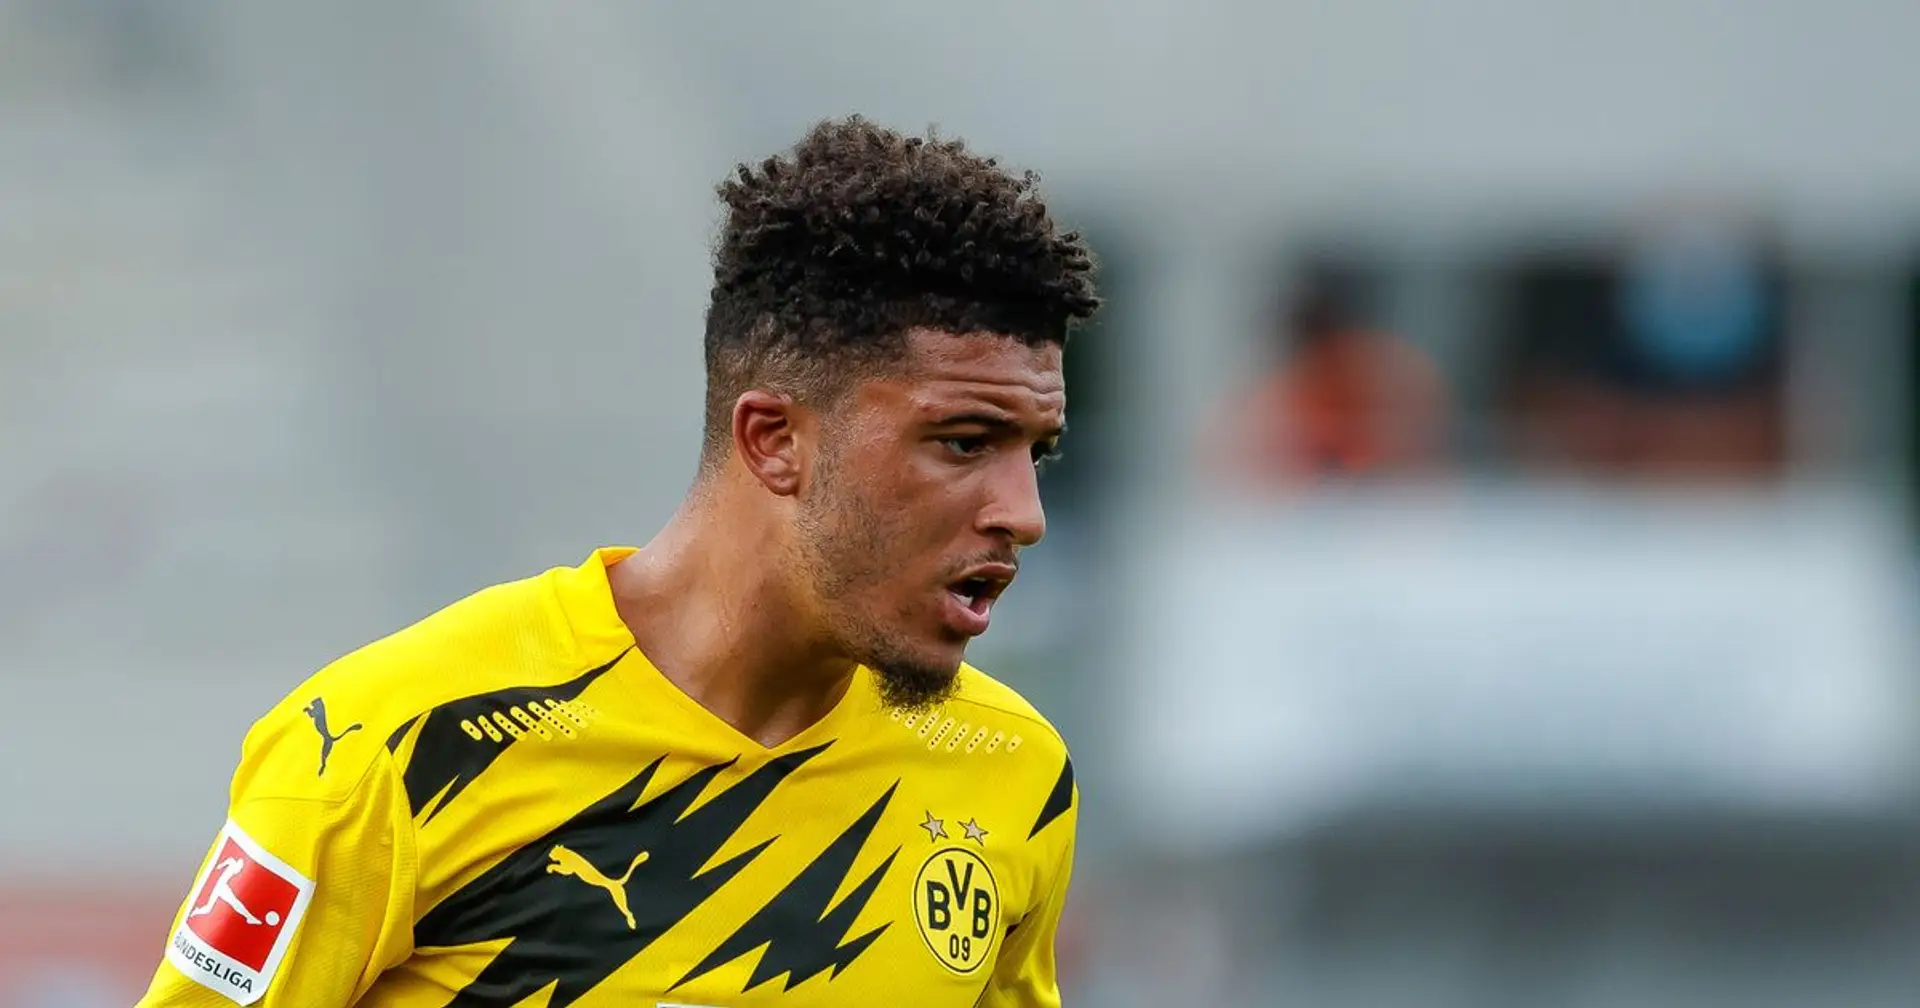 'Fantastic player; his potential is relatively unlimited': what Dortmund teammates think of Sancho